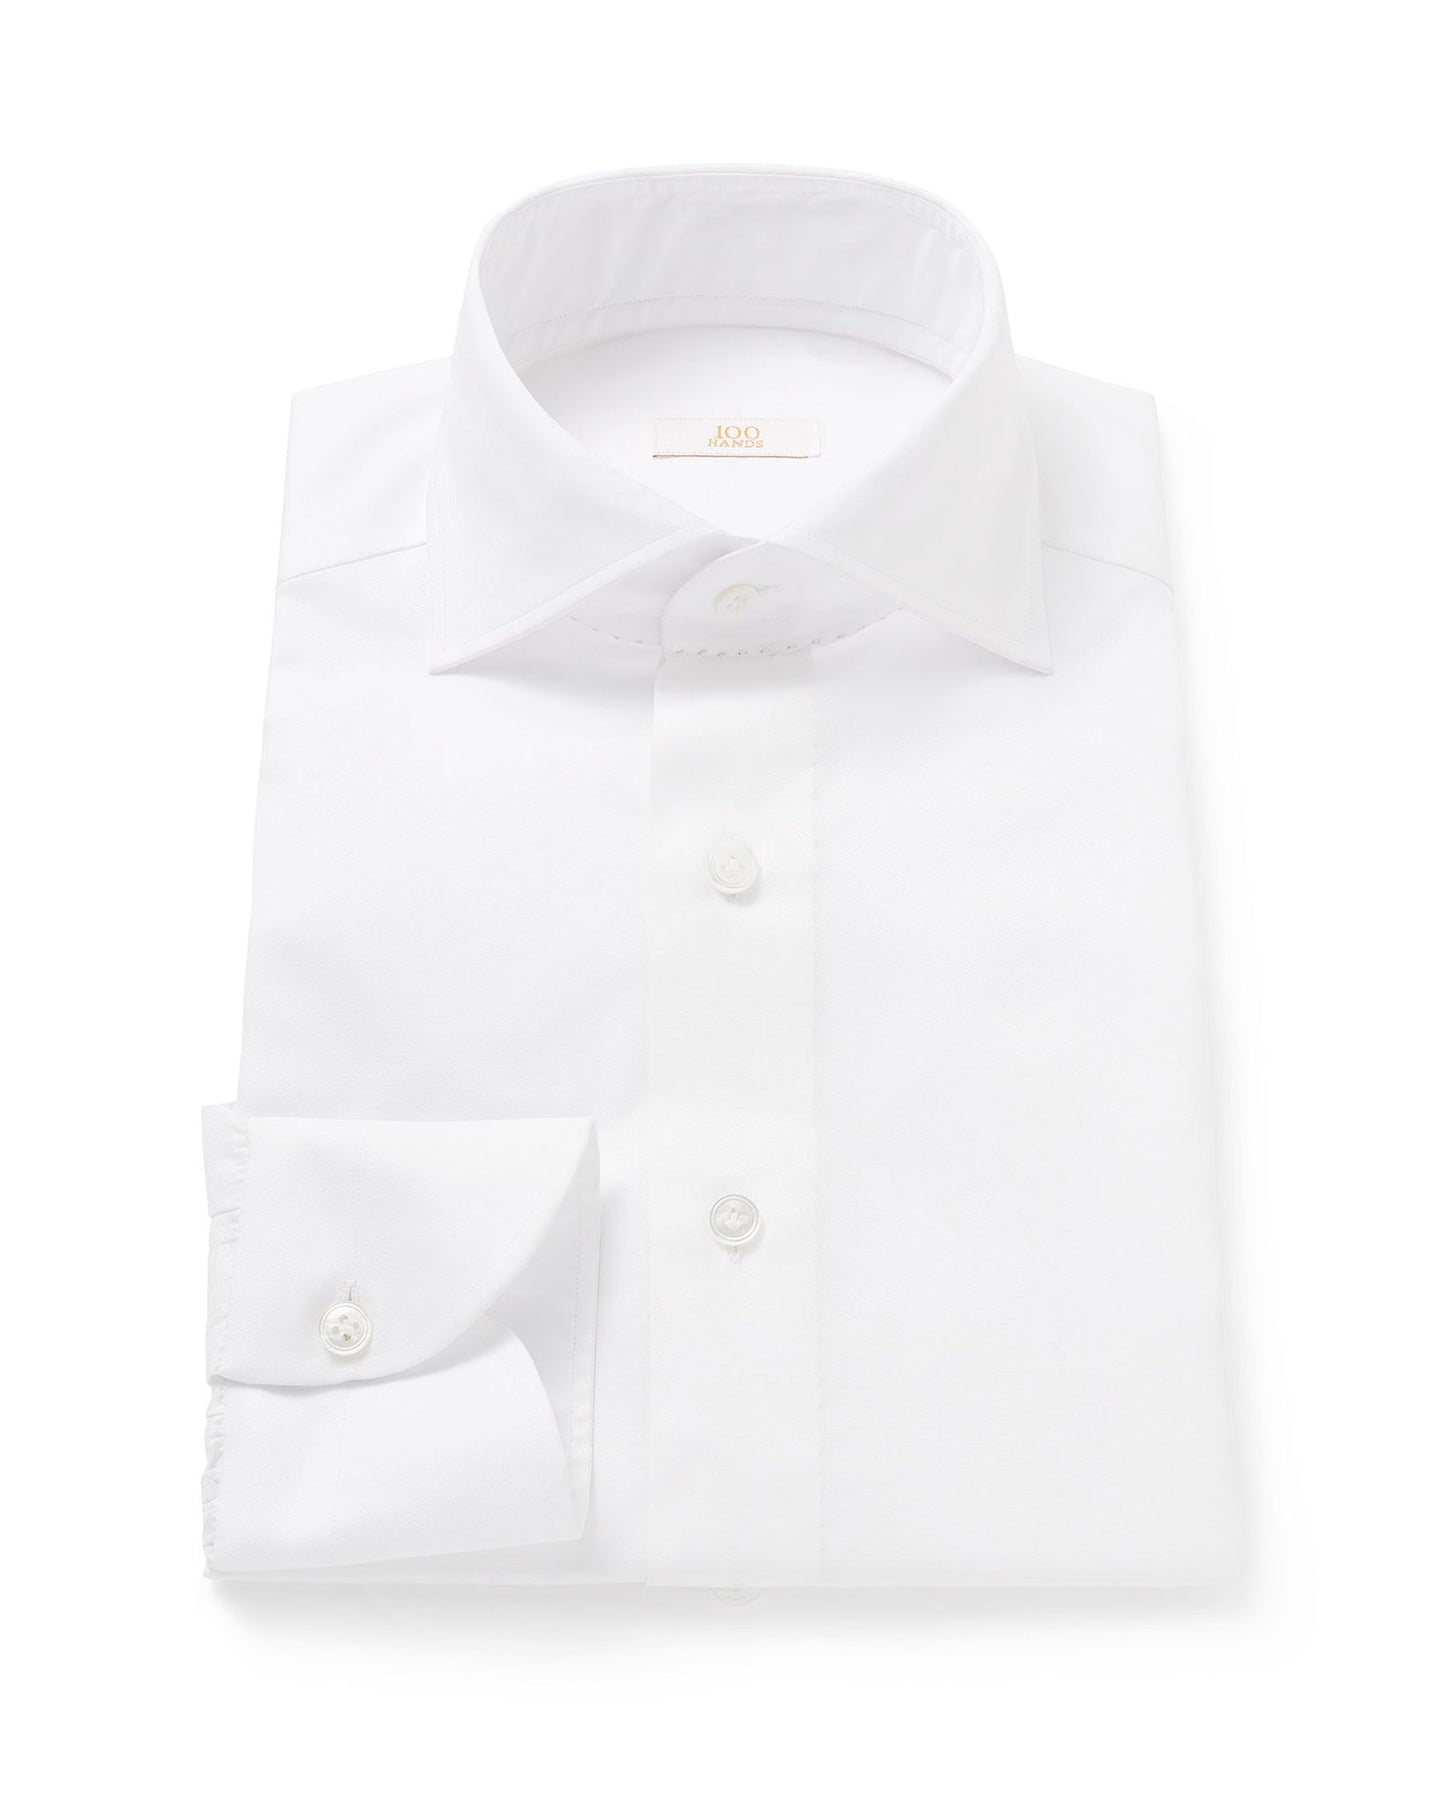 The Best Gold Line White Shirt - KING'S